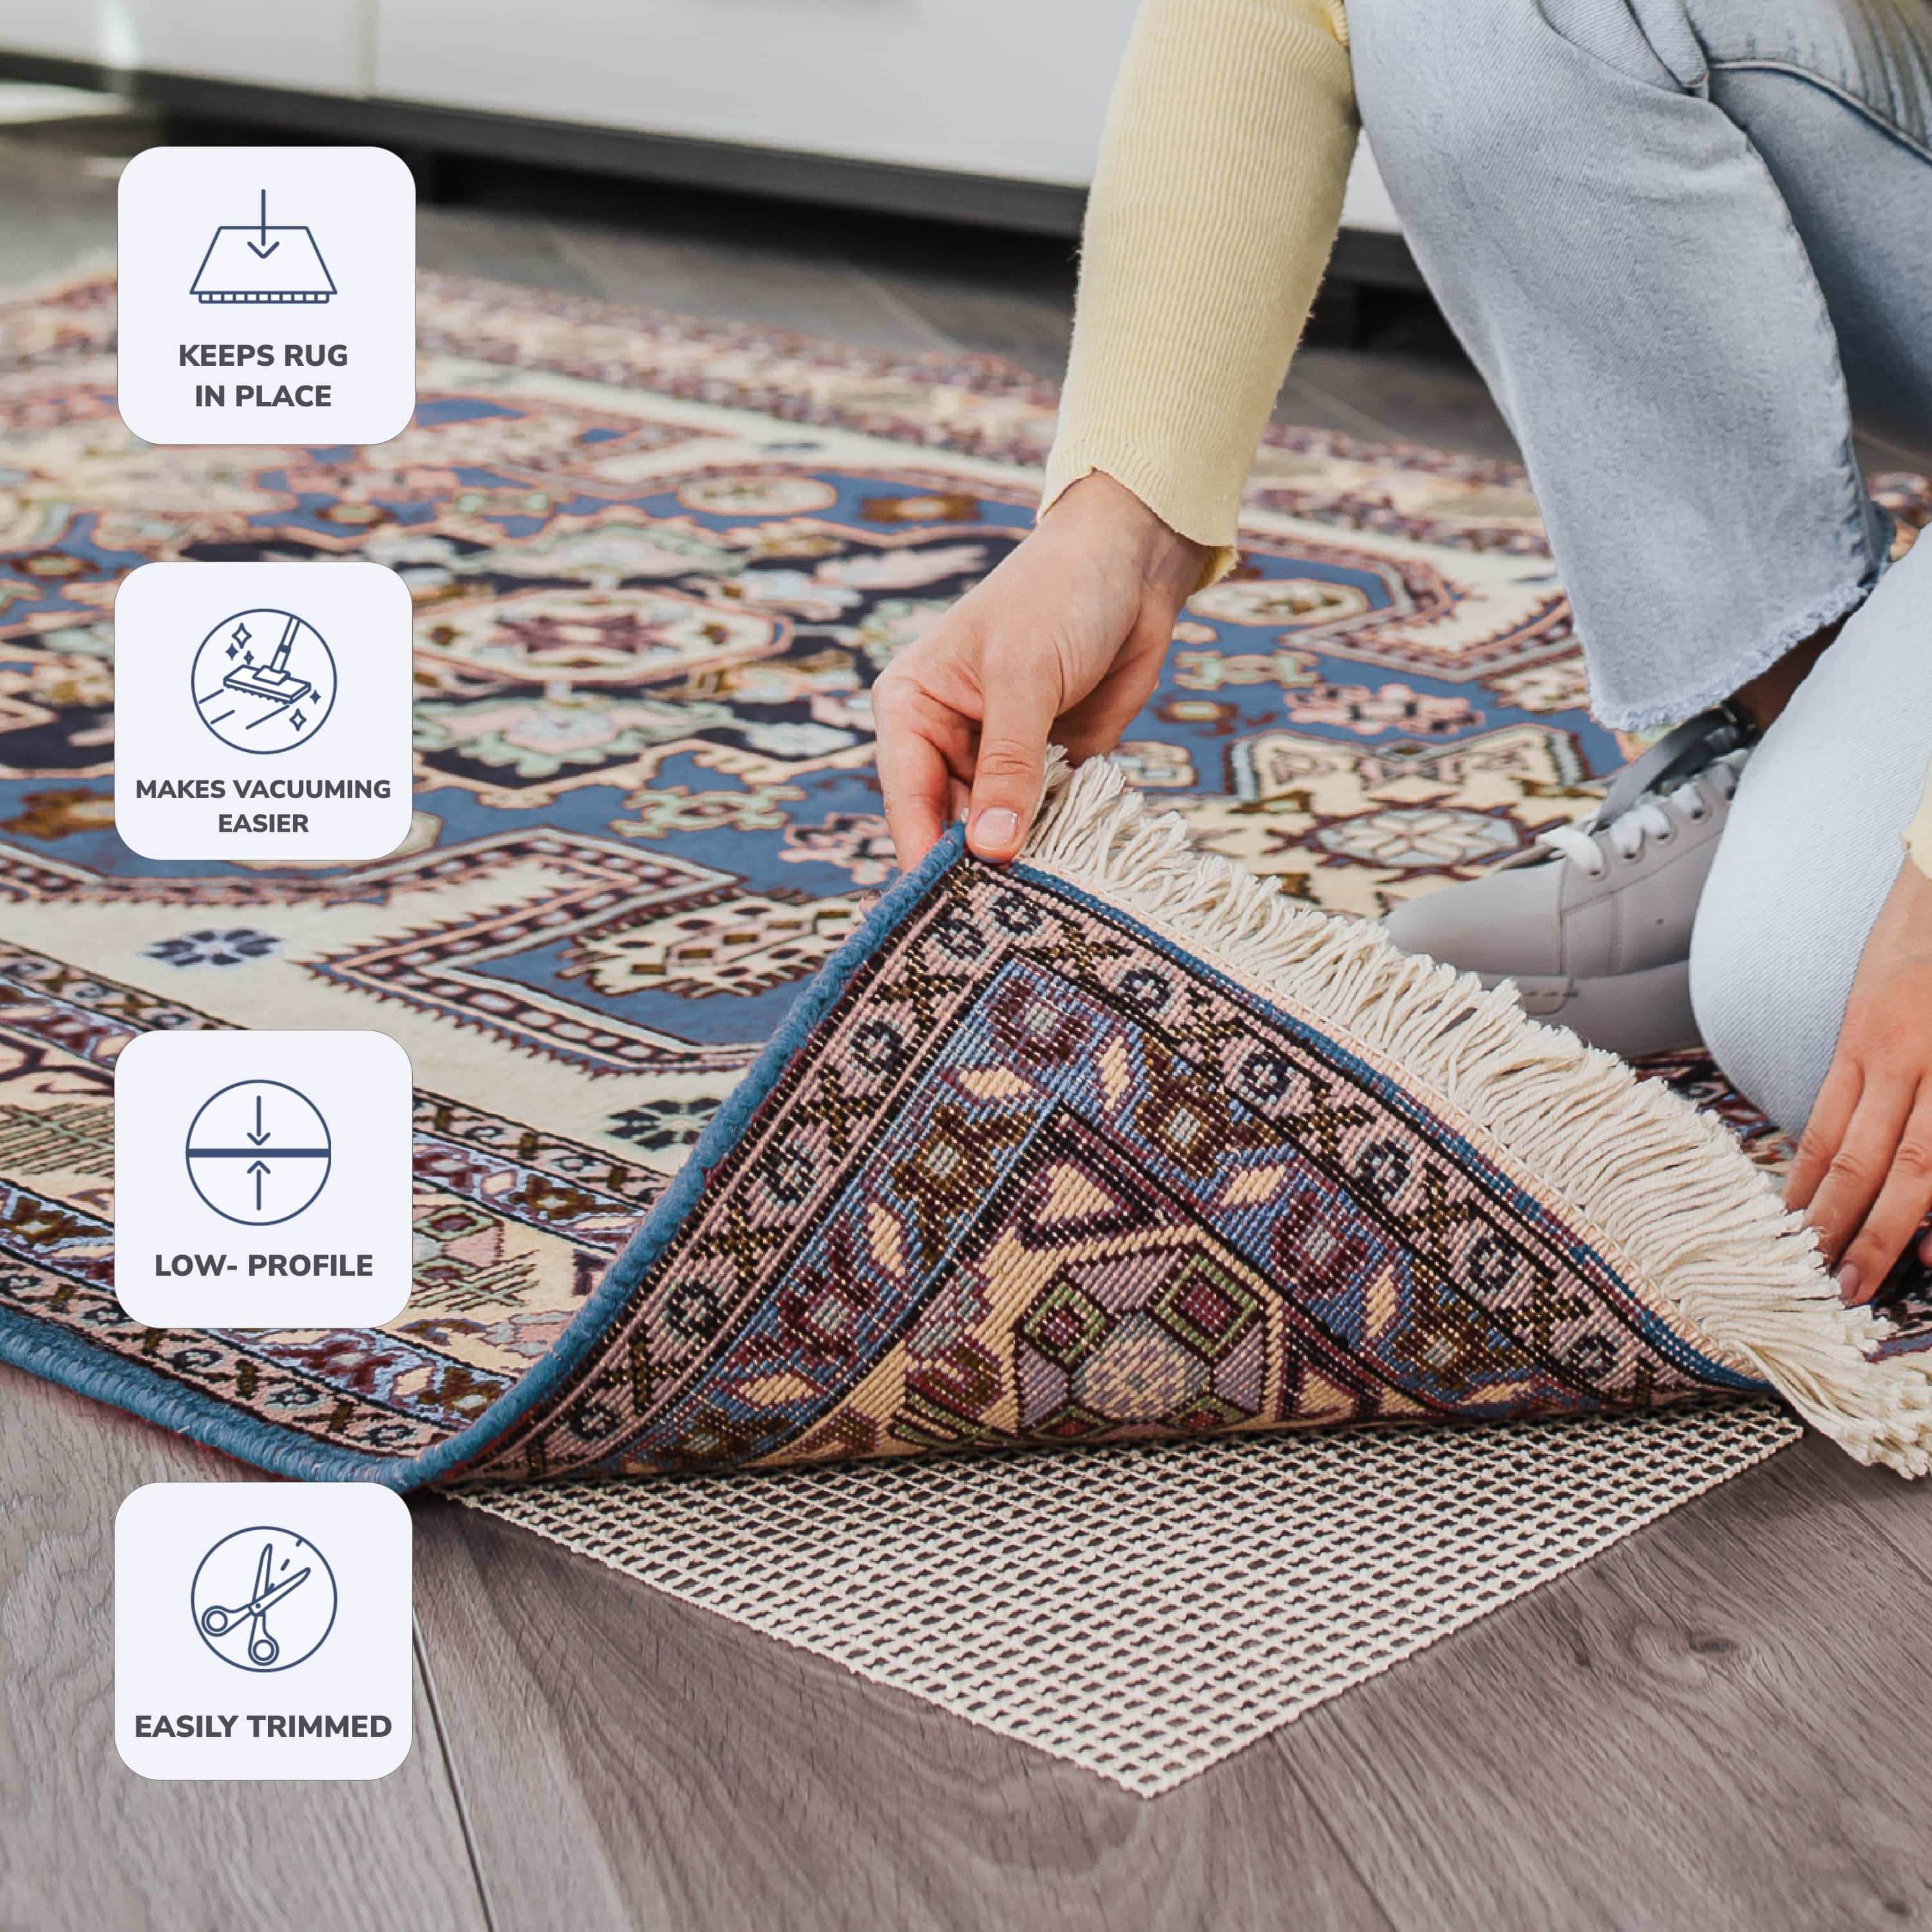 https://ak1.ostkcdn.com/images/products/is/images/direct/c3c769b605803be024c4fb691e97a6c961c2ed68/Ultra-Non-Slip-Rug-Pad-by-Slip-Stop.jpg